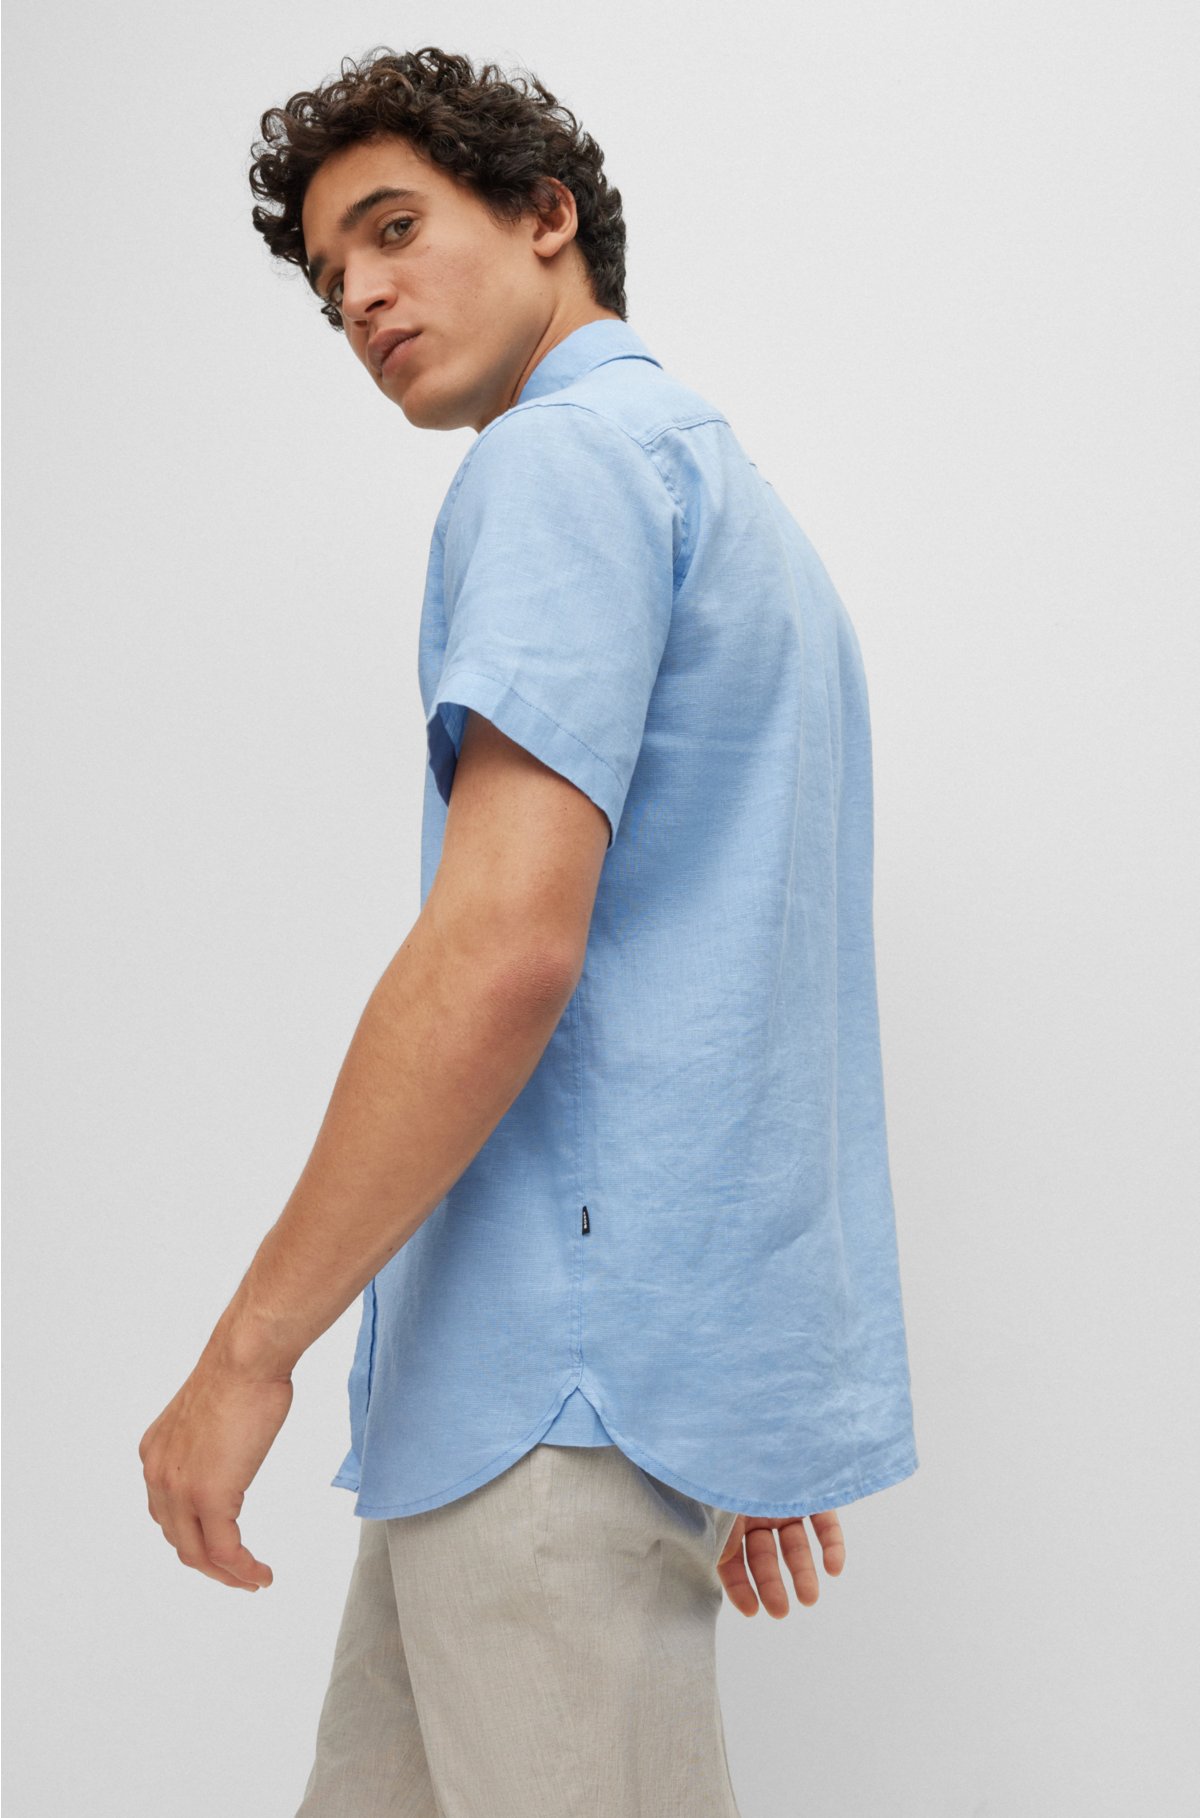 TOPMAN Slim Fit Contrast Cuff Short Sleeve Button-up Shirt in Blue for Men